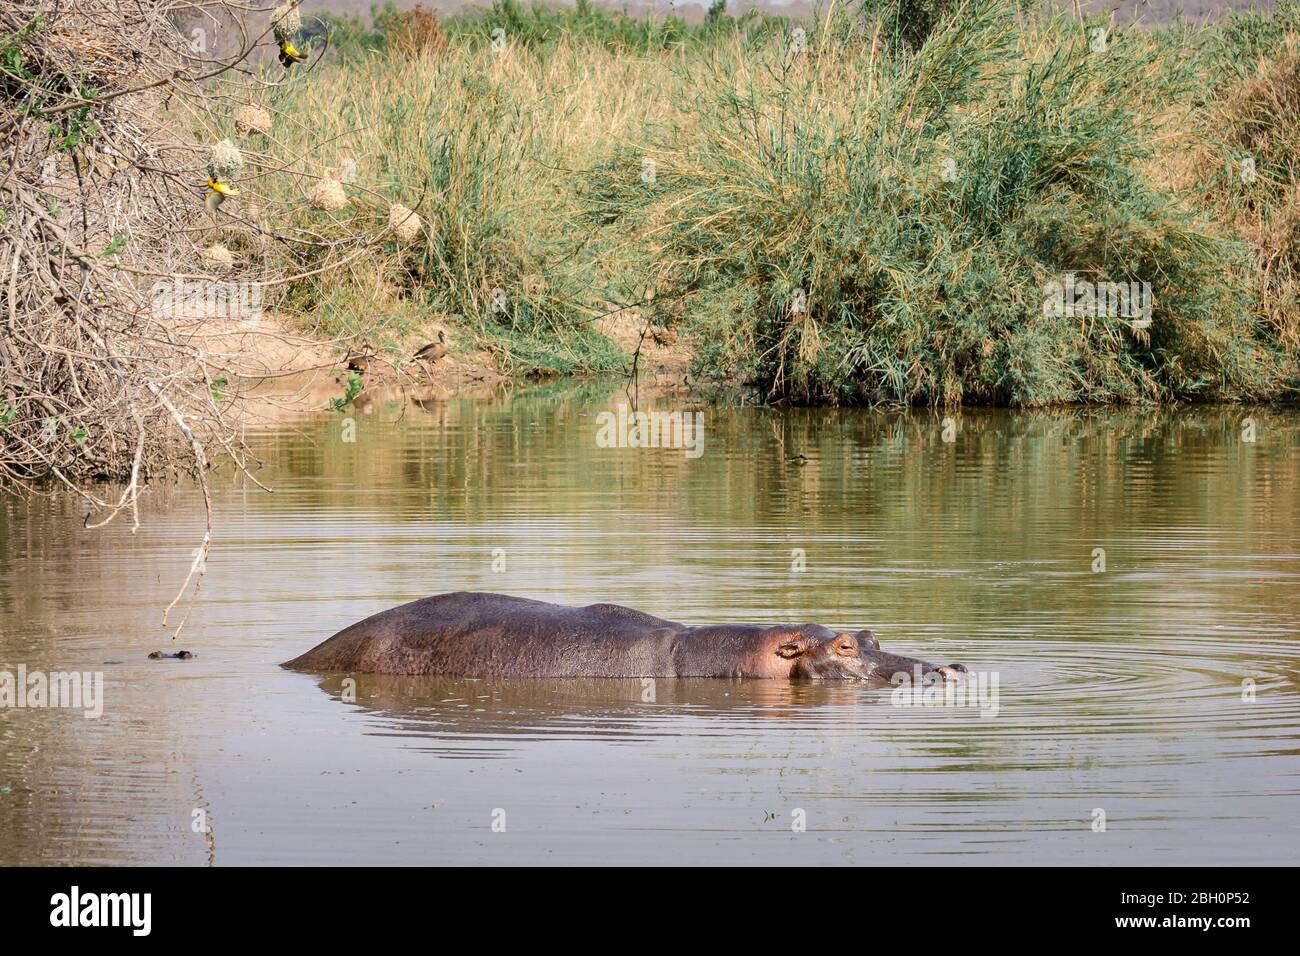 Hippo, Hippopotamus amphibius submerged in water hole Kruger national park South Africa Stock Photo